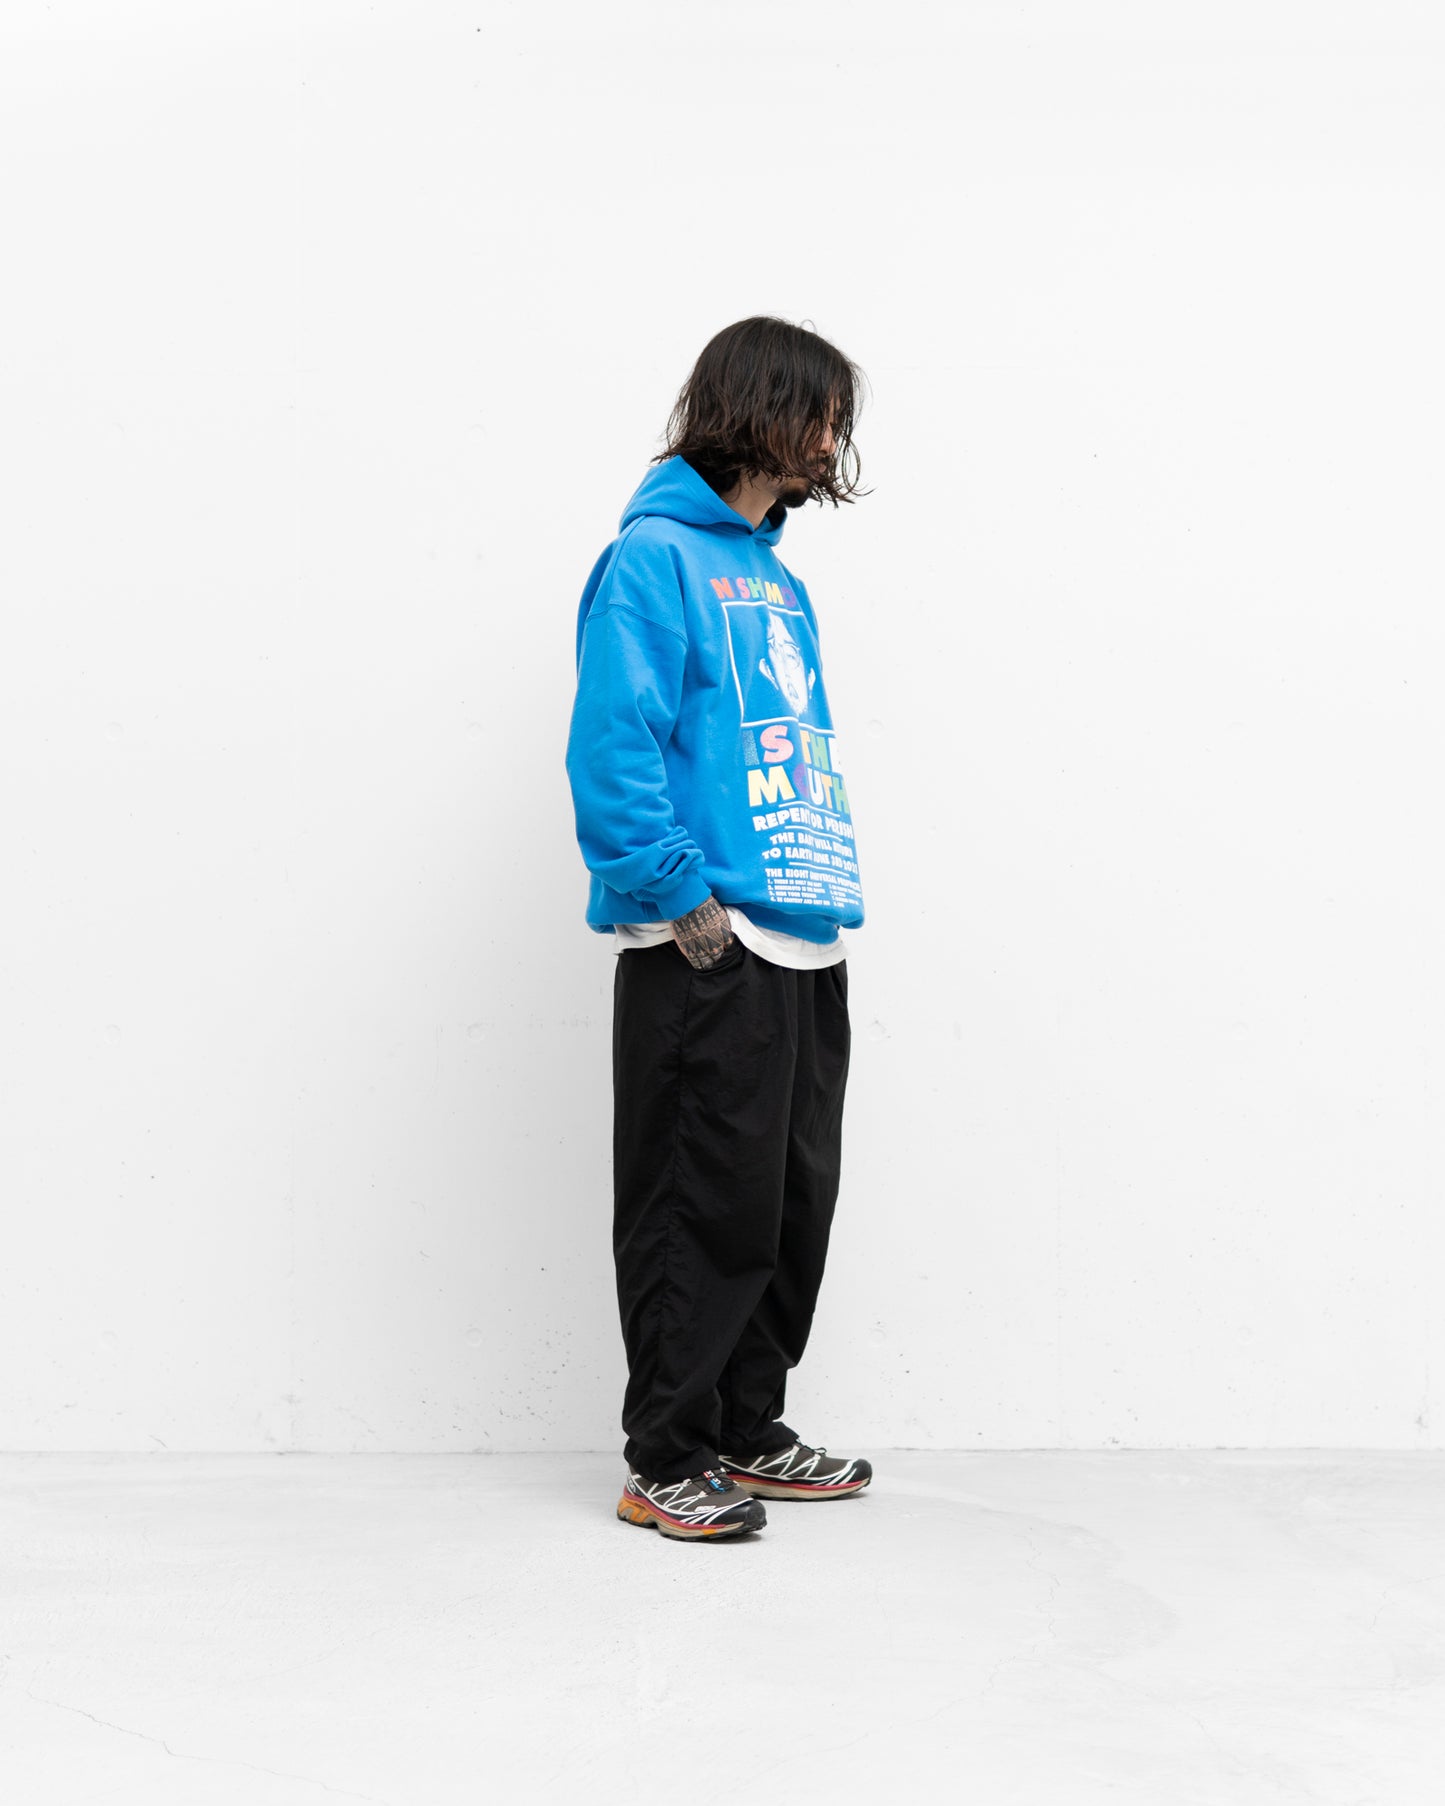 NISHIMOTO IS THE MOUTH CLASSIC SWEAT HOODIE(GLITTER)